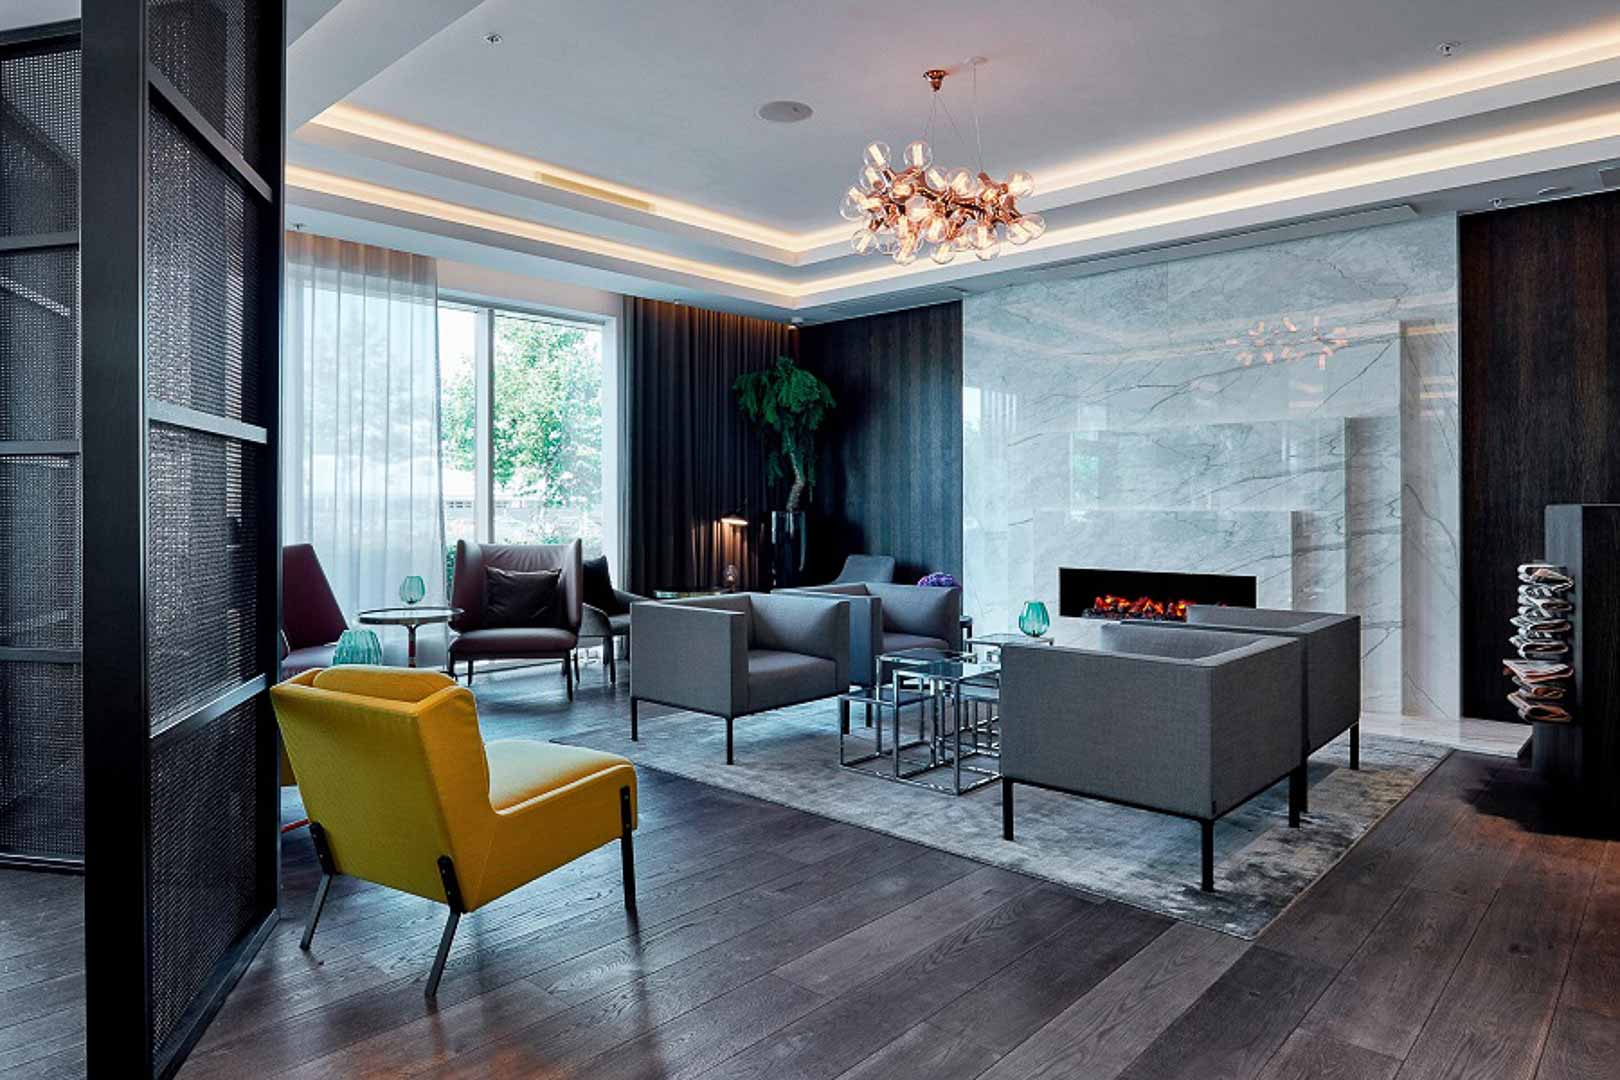 Suite including a living room, Marriott Hotel fitout and furniture, Brussels, Belgium